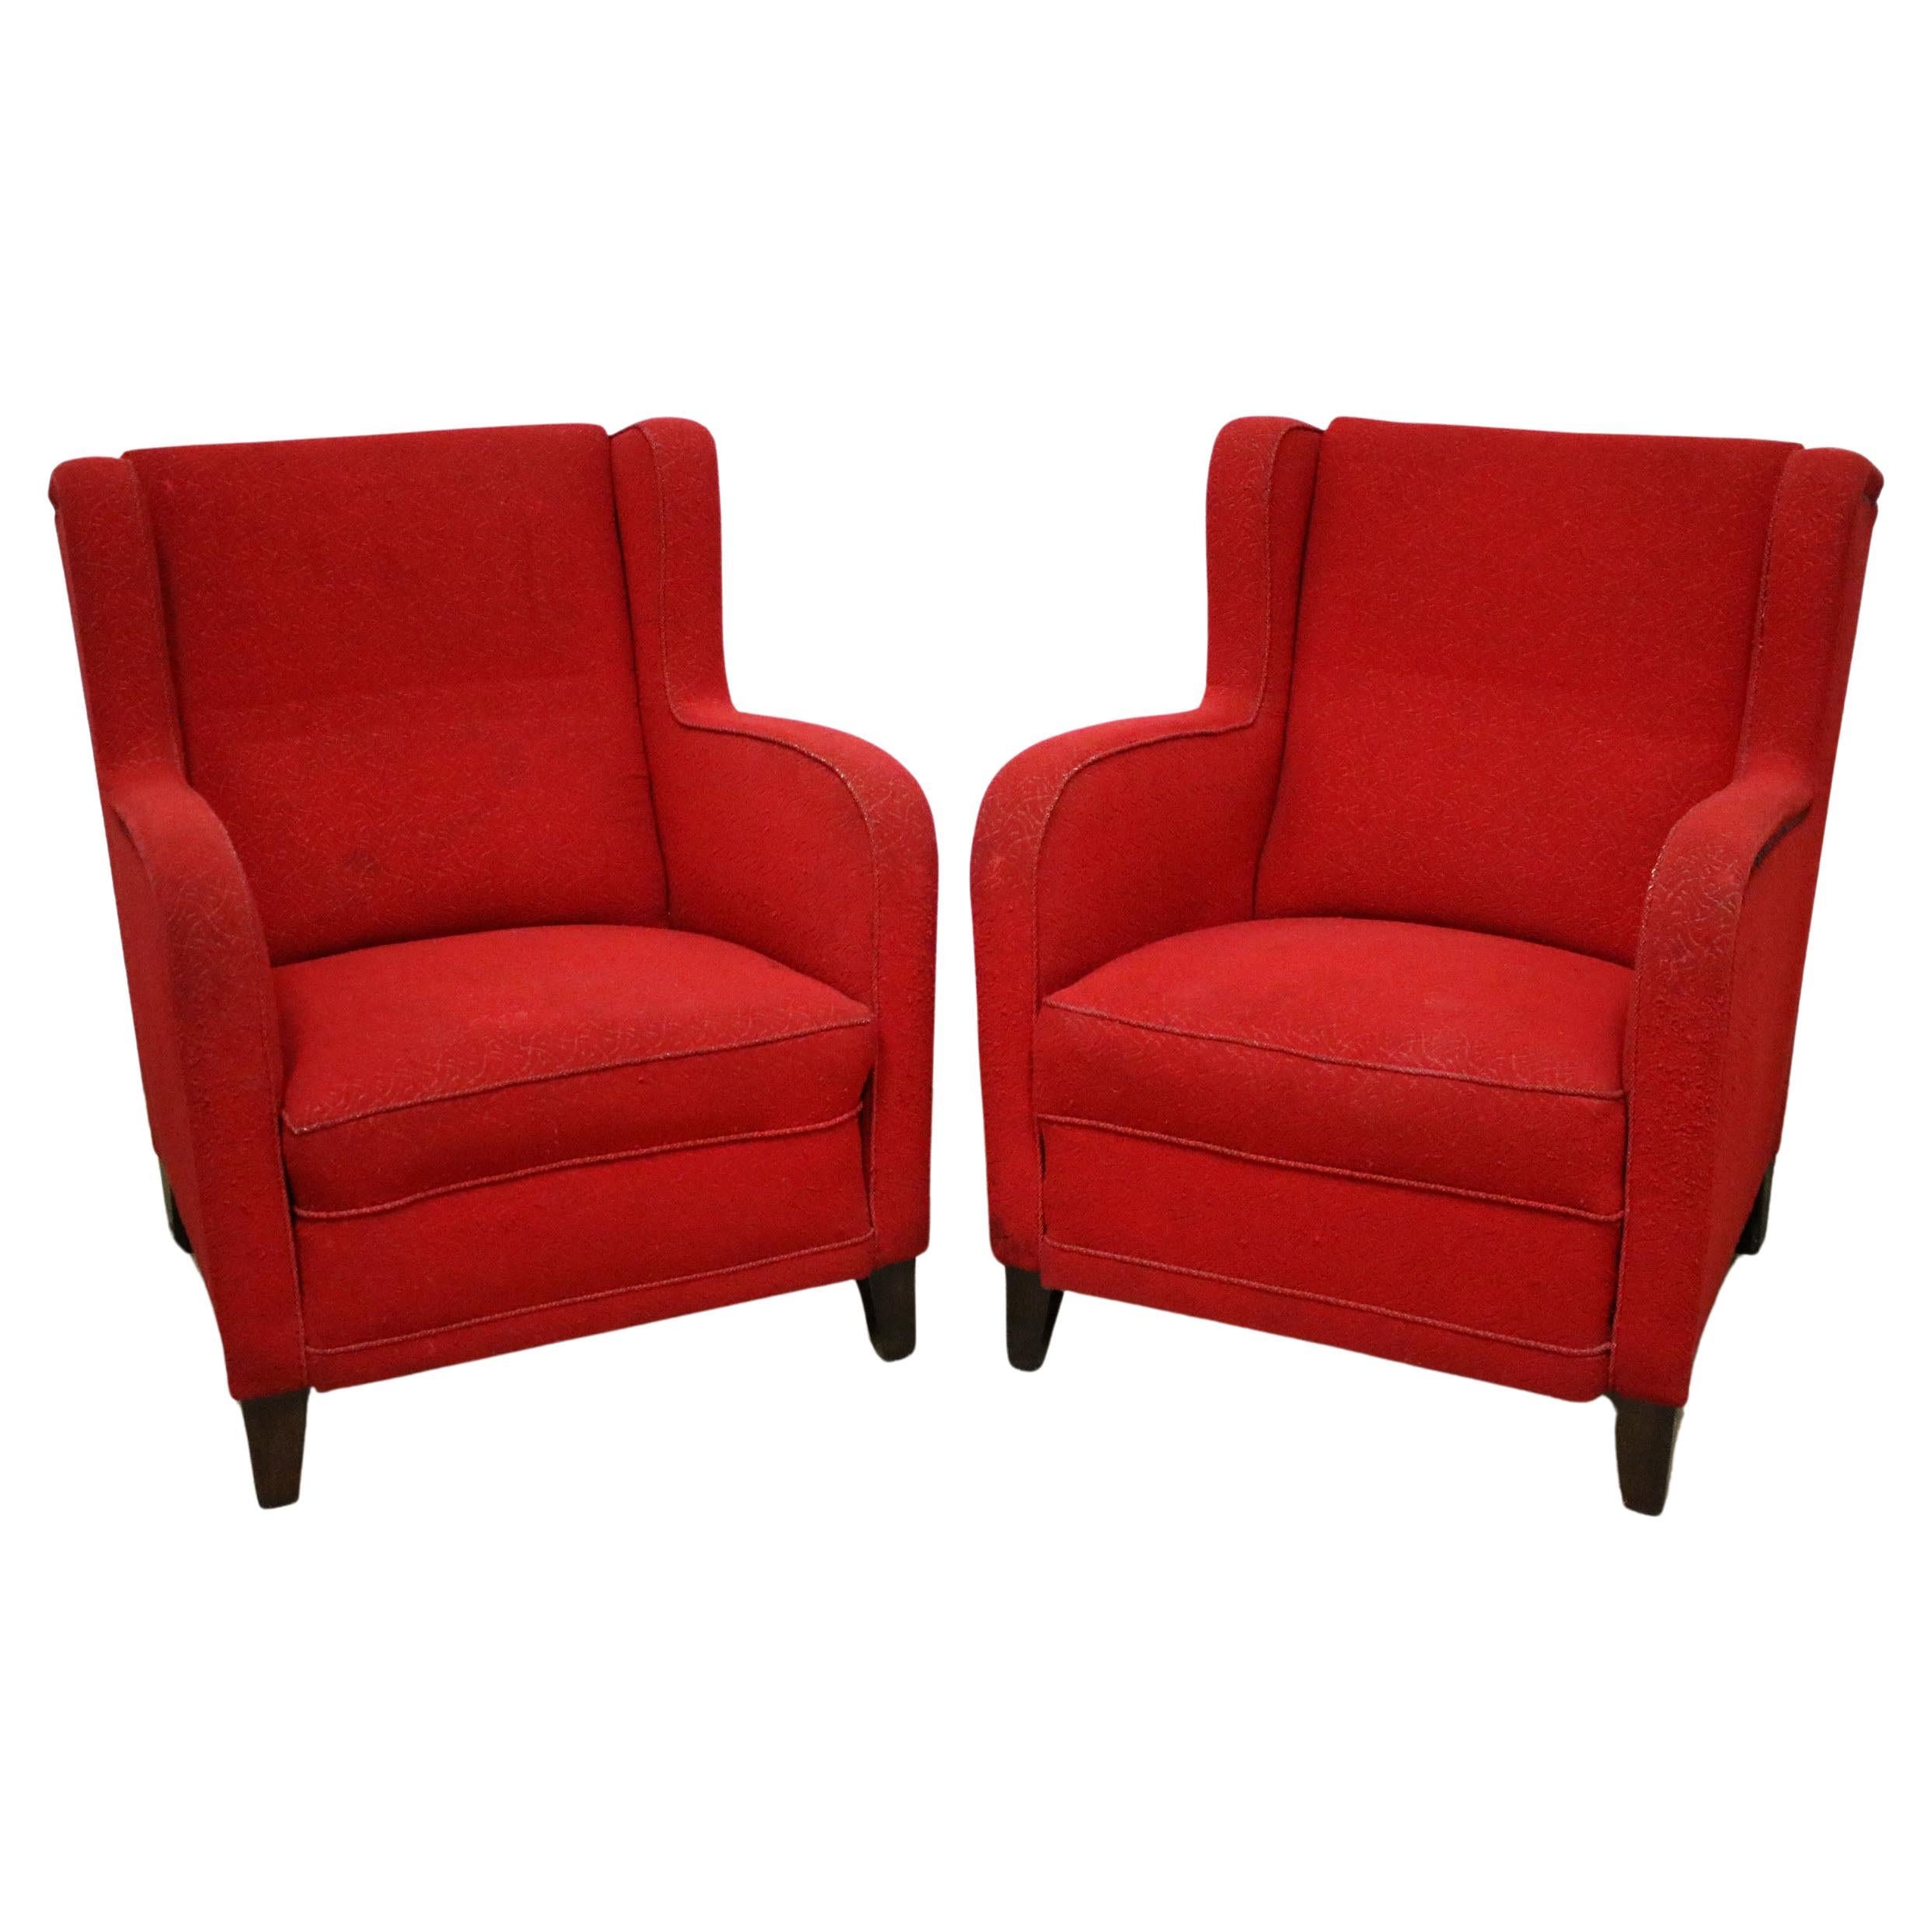 Mid 20th Century Pair Of Club Chairs For Sale